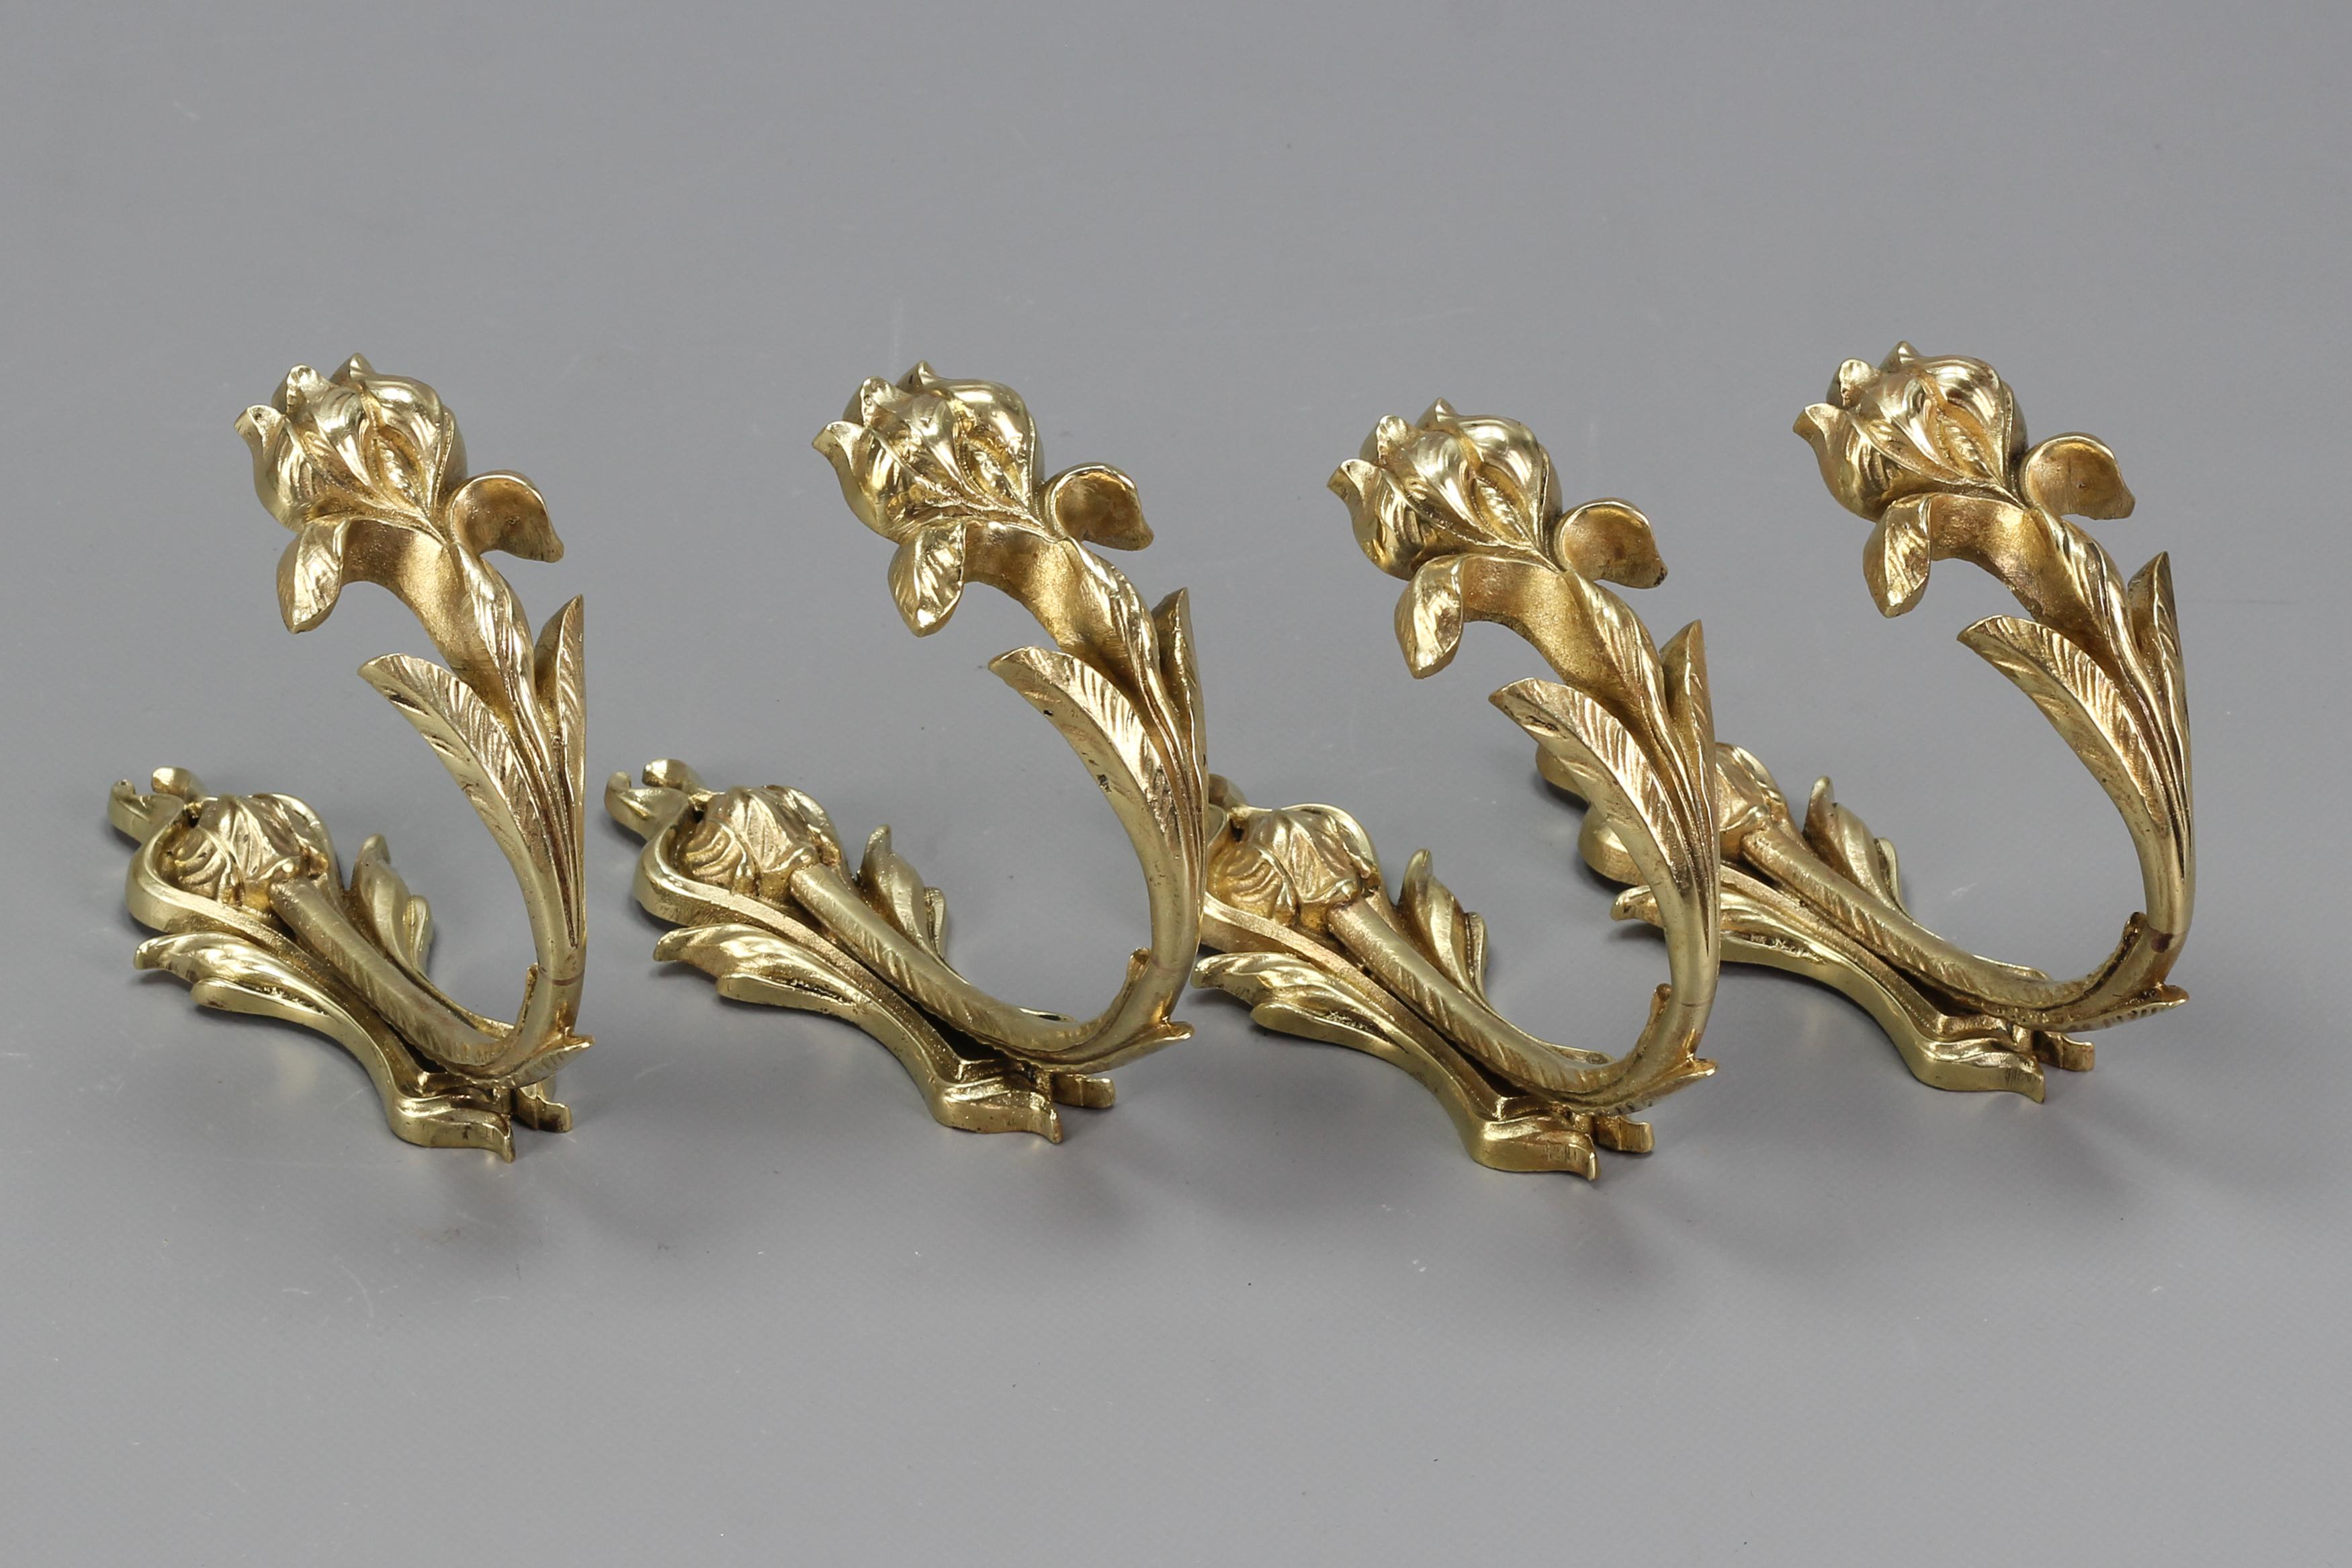 French Art Nouveau bronze curtain tiebacks or curtain holders iris, set of four.
A beautiful set of four Art Nouveau bronze curtain holders or supports, or tiebacks in the shape of an iris flower. 
Each curtain holder is marked and numbered.